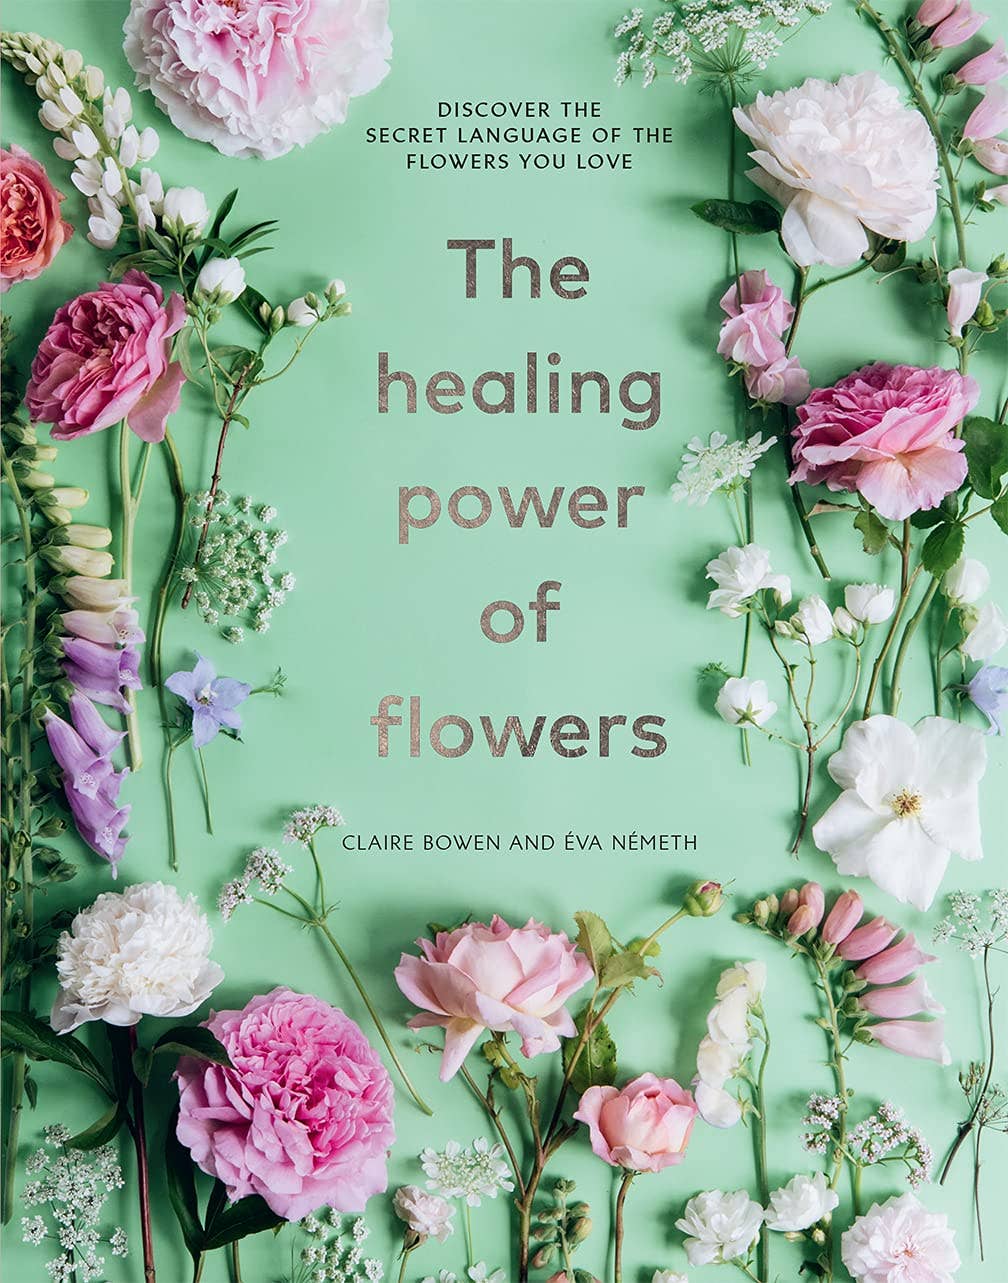 Union Square & Co. - Healing Power of Flowers by Claire Bowen